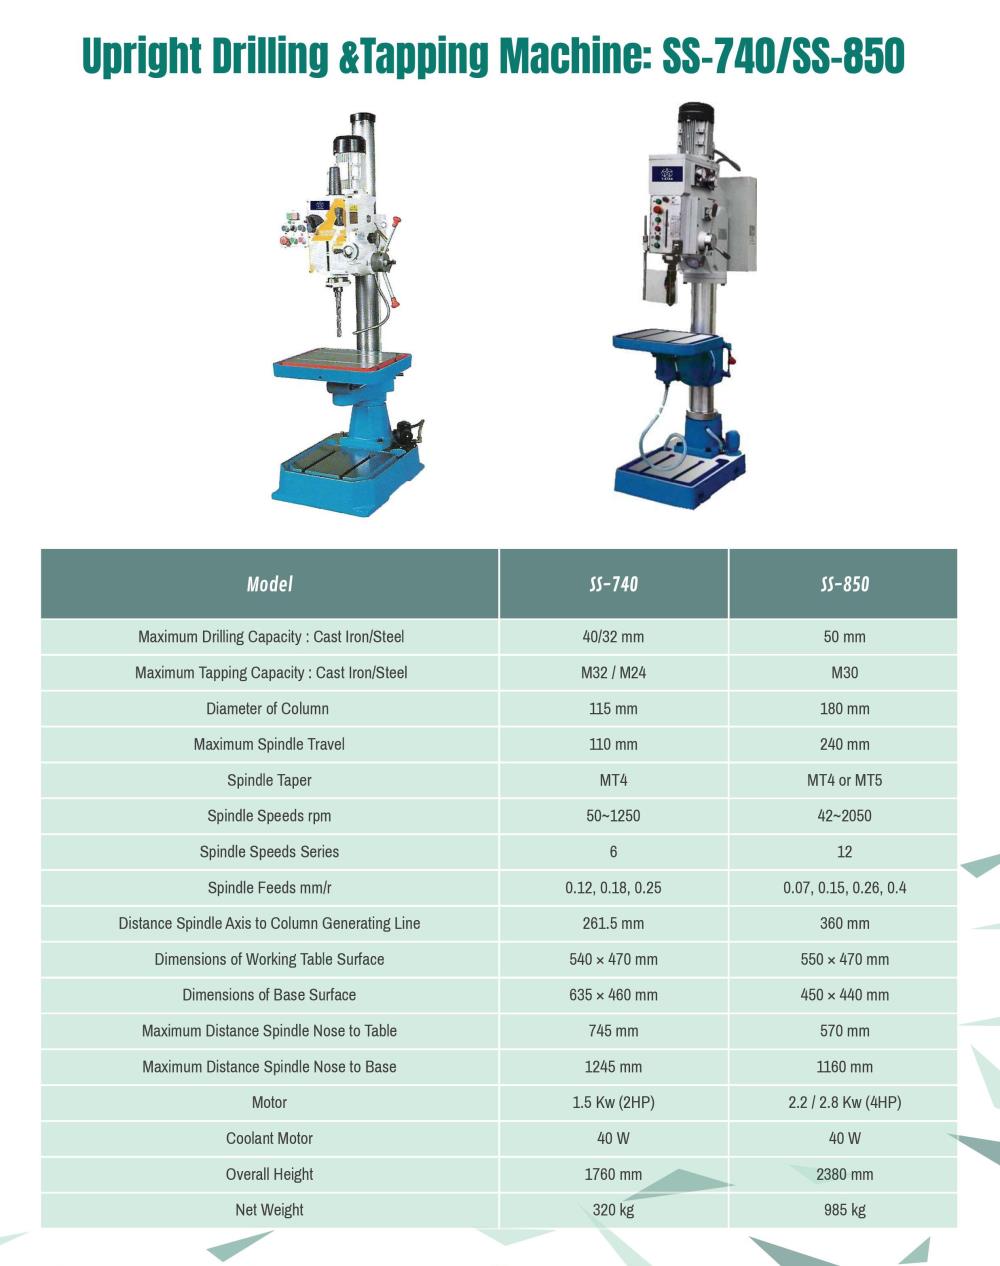 Upright Drilling &Tapping Machine: SS-740/SS-850,Drilling,Tapping,Drill,Tapping,Maximum Drilling Capacity : 50mm,Custom Manufacturing and Fabricating/Drilling